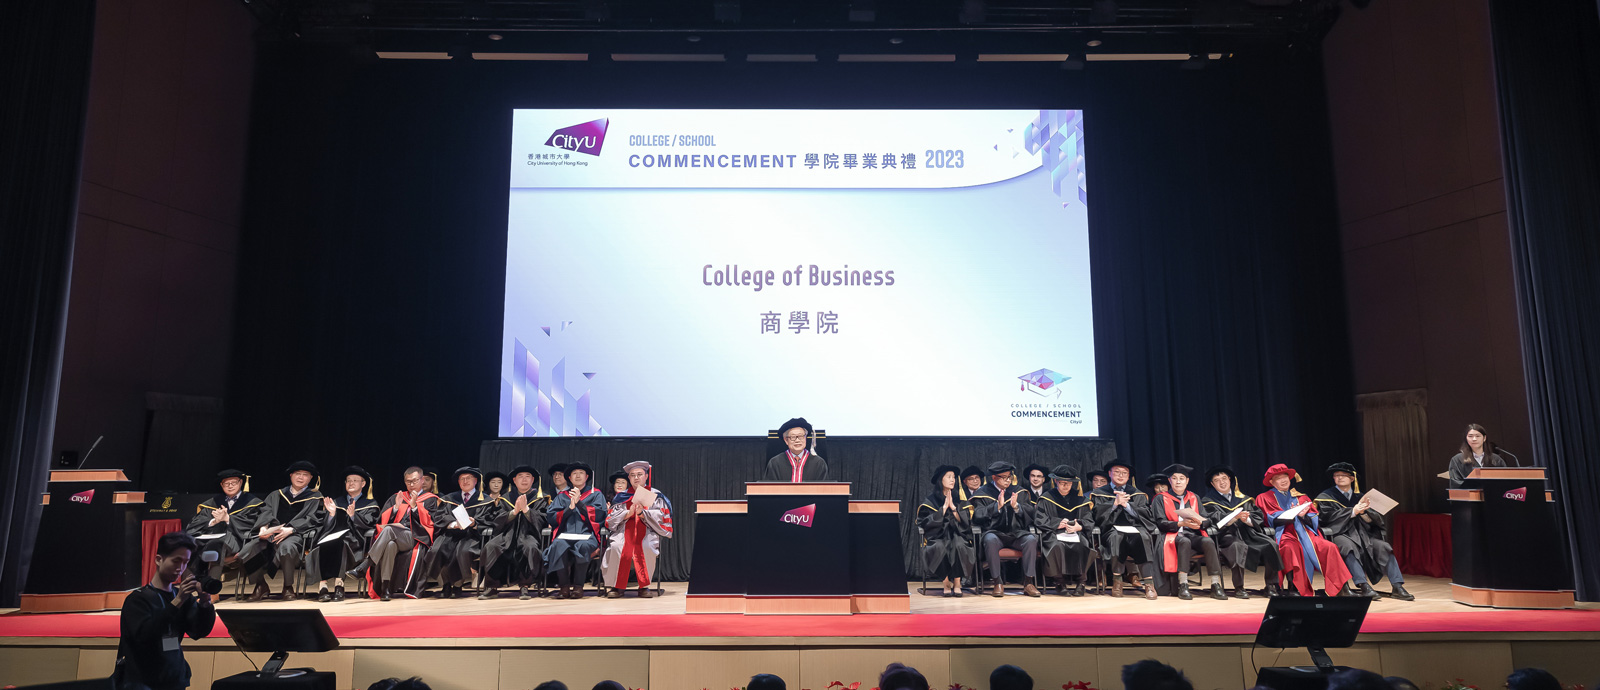 College of Business Commencement Ceremony 2023